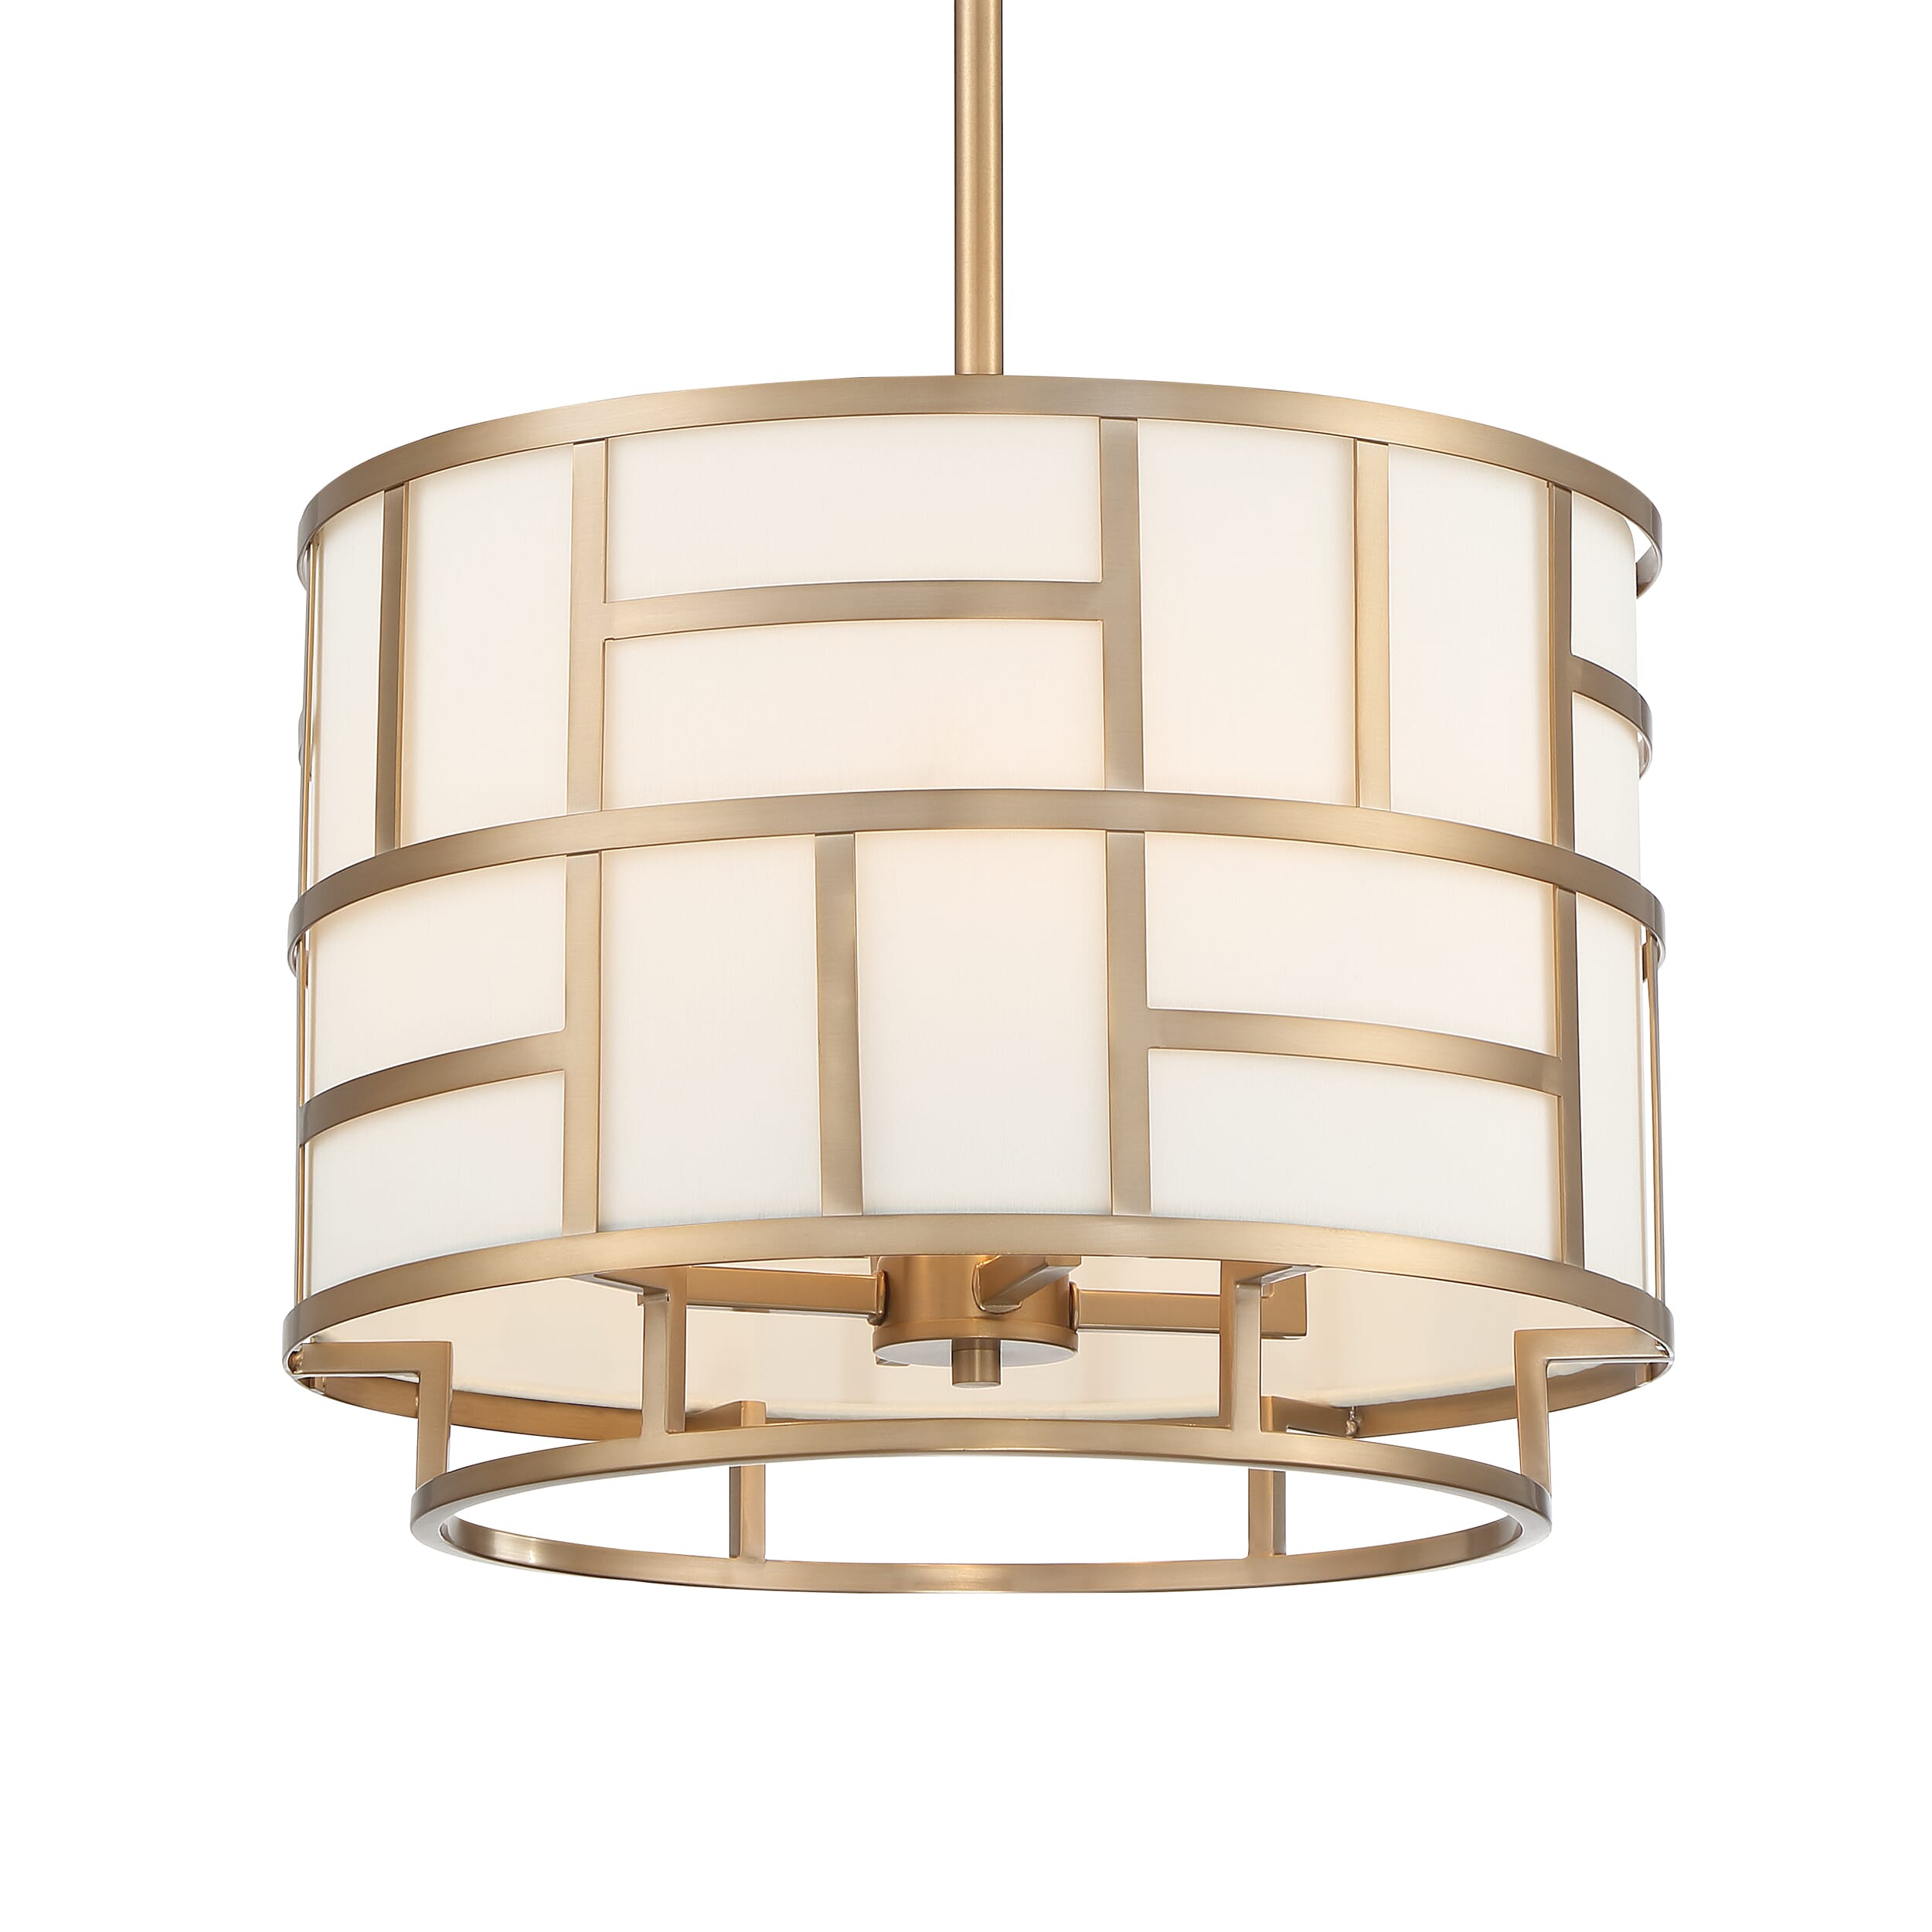 Libby Langdon for Crystorama Danielson 13" Transitional Chandelier in Vibrant Gold